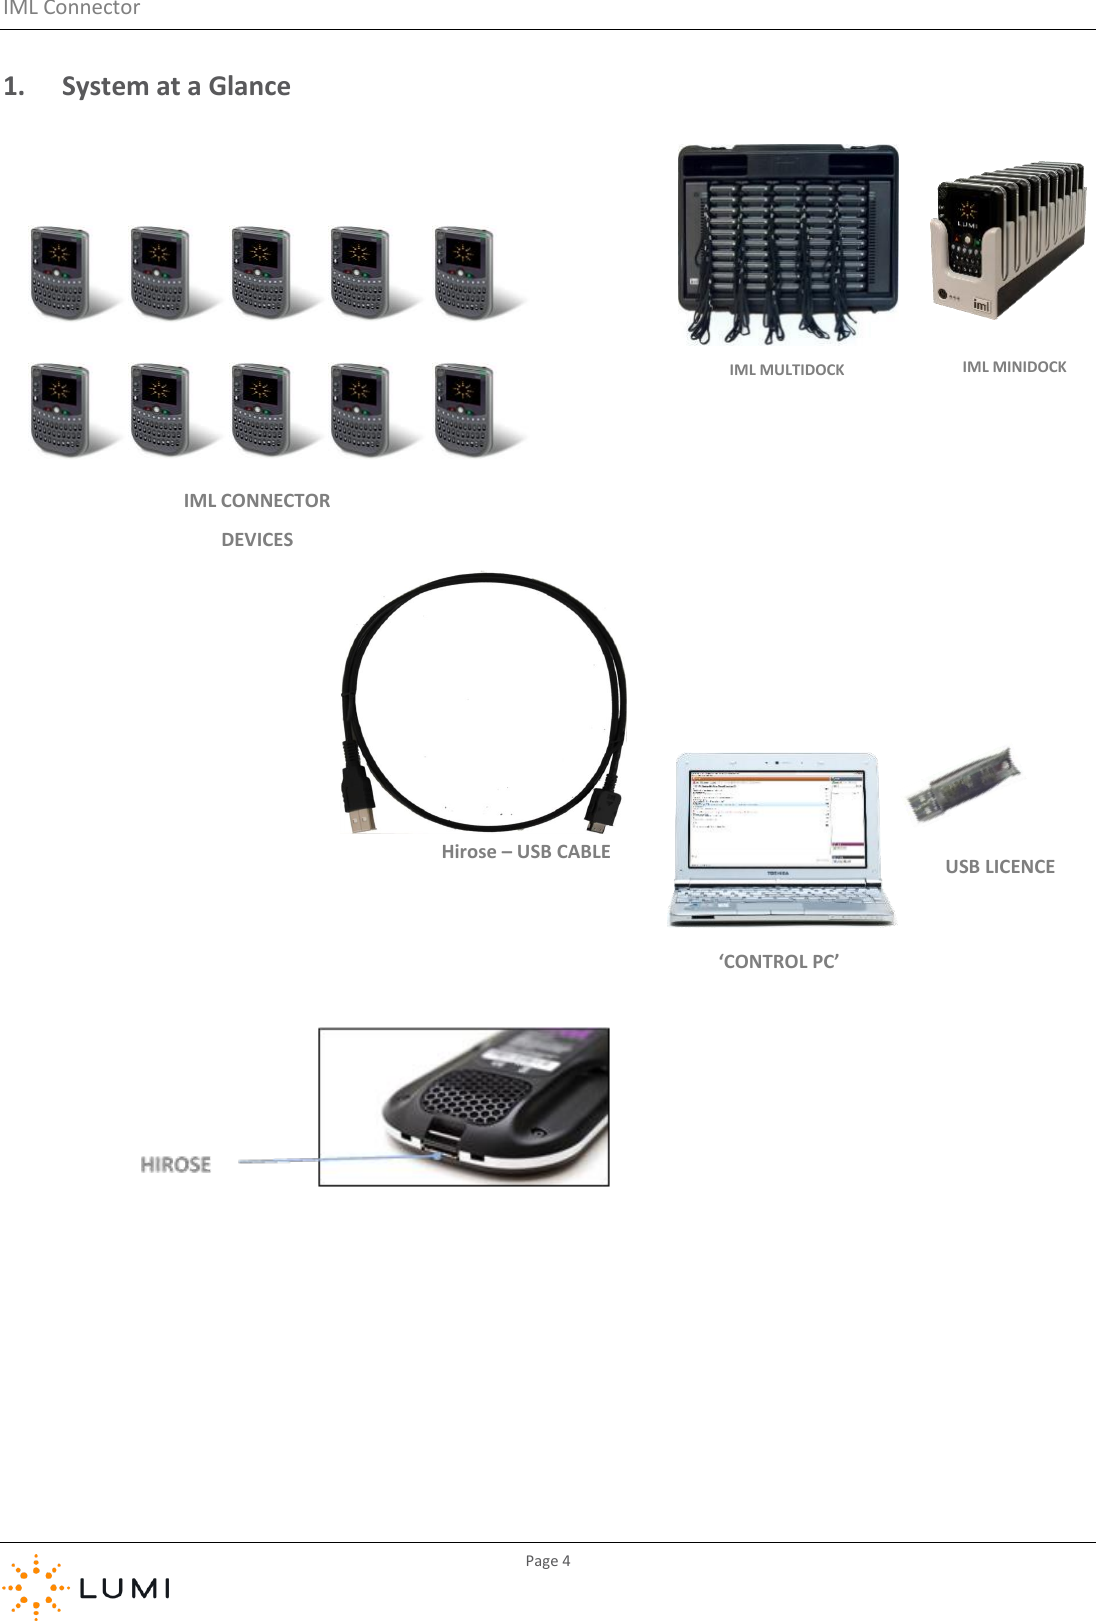 IML Connector         Page 4  1. System at a Glance                        Hirose – USB CABLE ‘CONTROL PC’ USB LICENCE IML CONNECTOR DEVICES IML MULTIDOCK IML MINIDOCK 